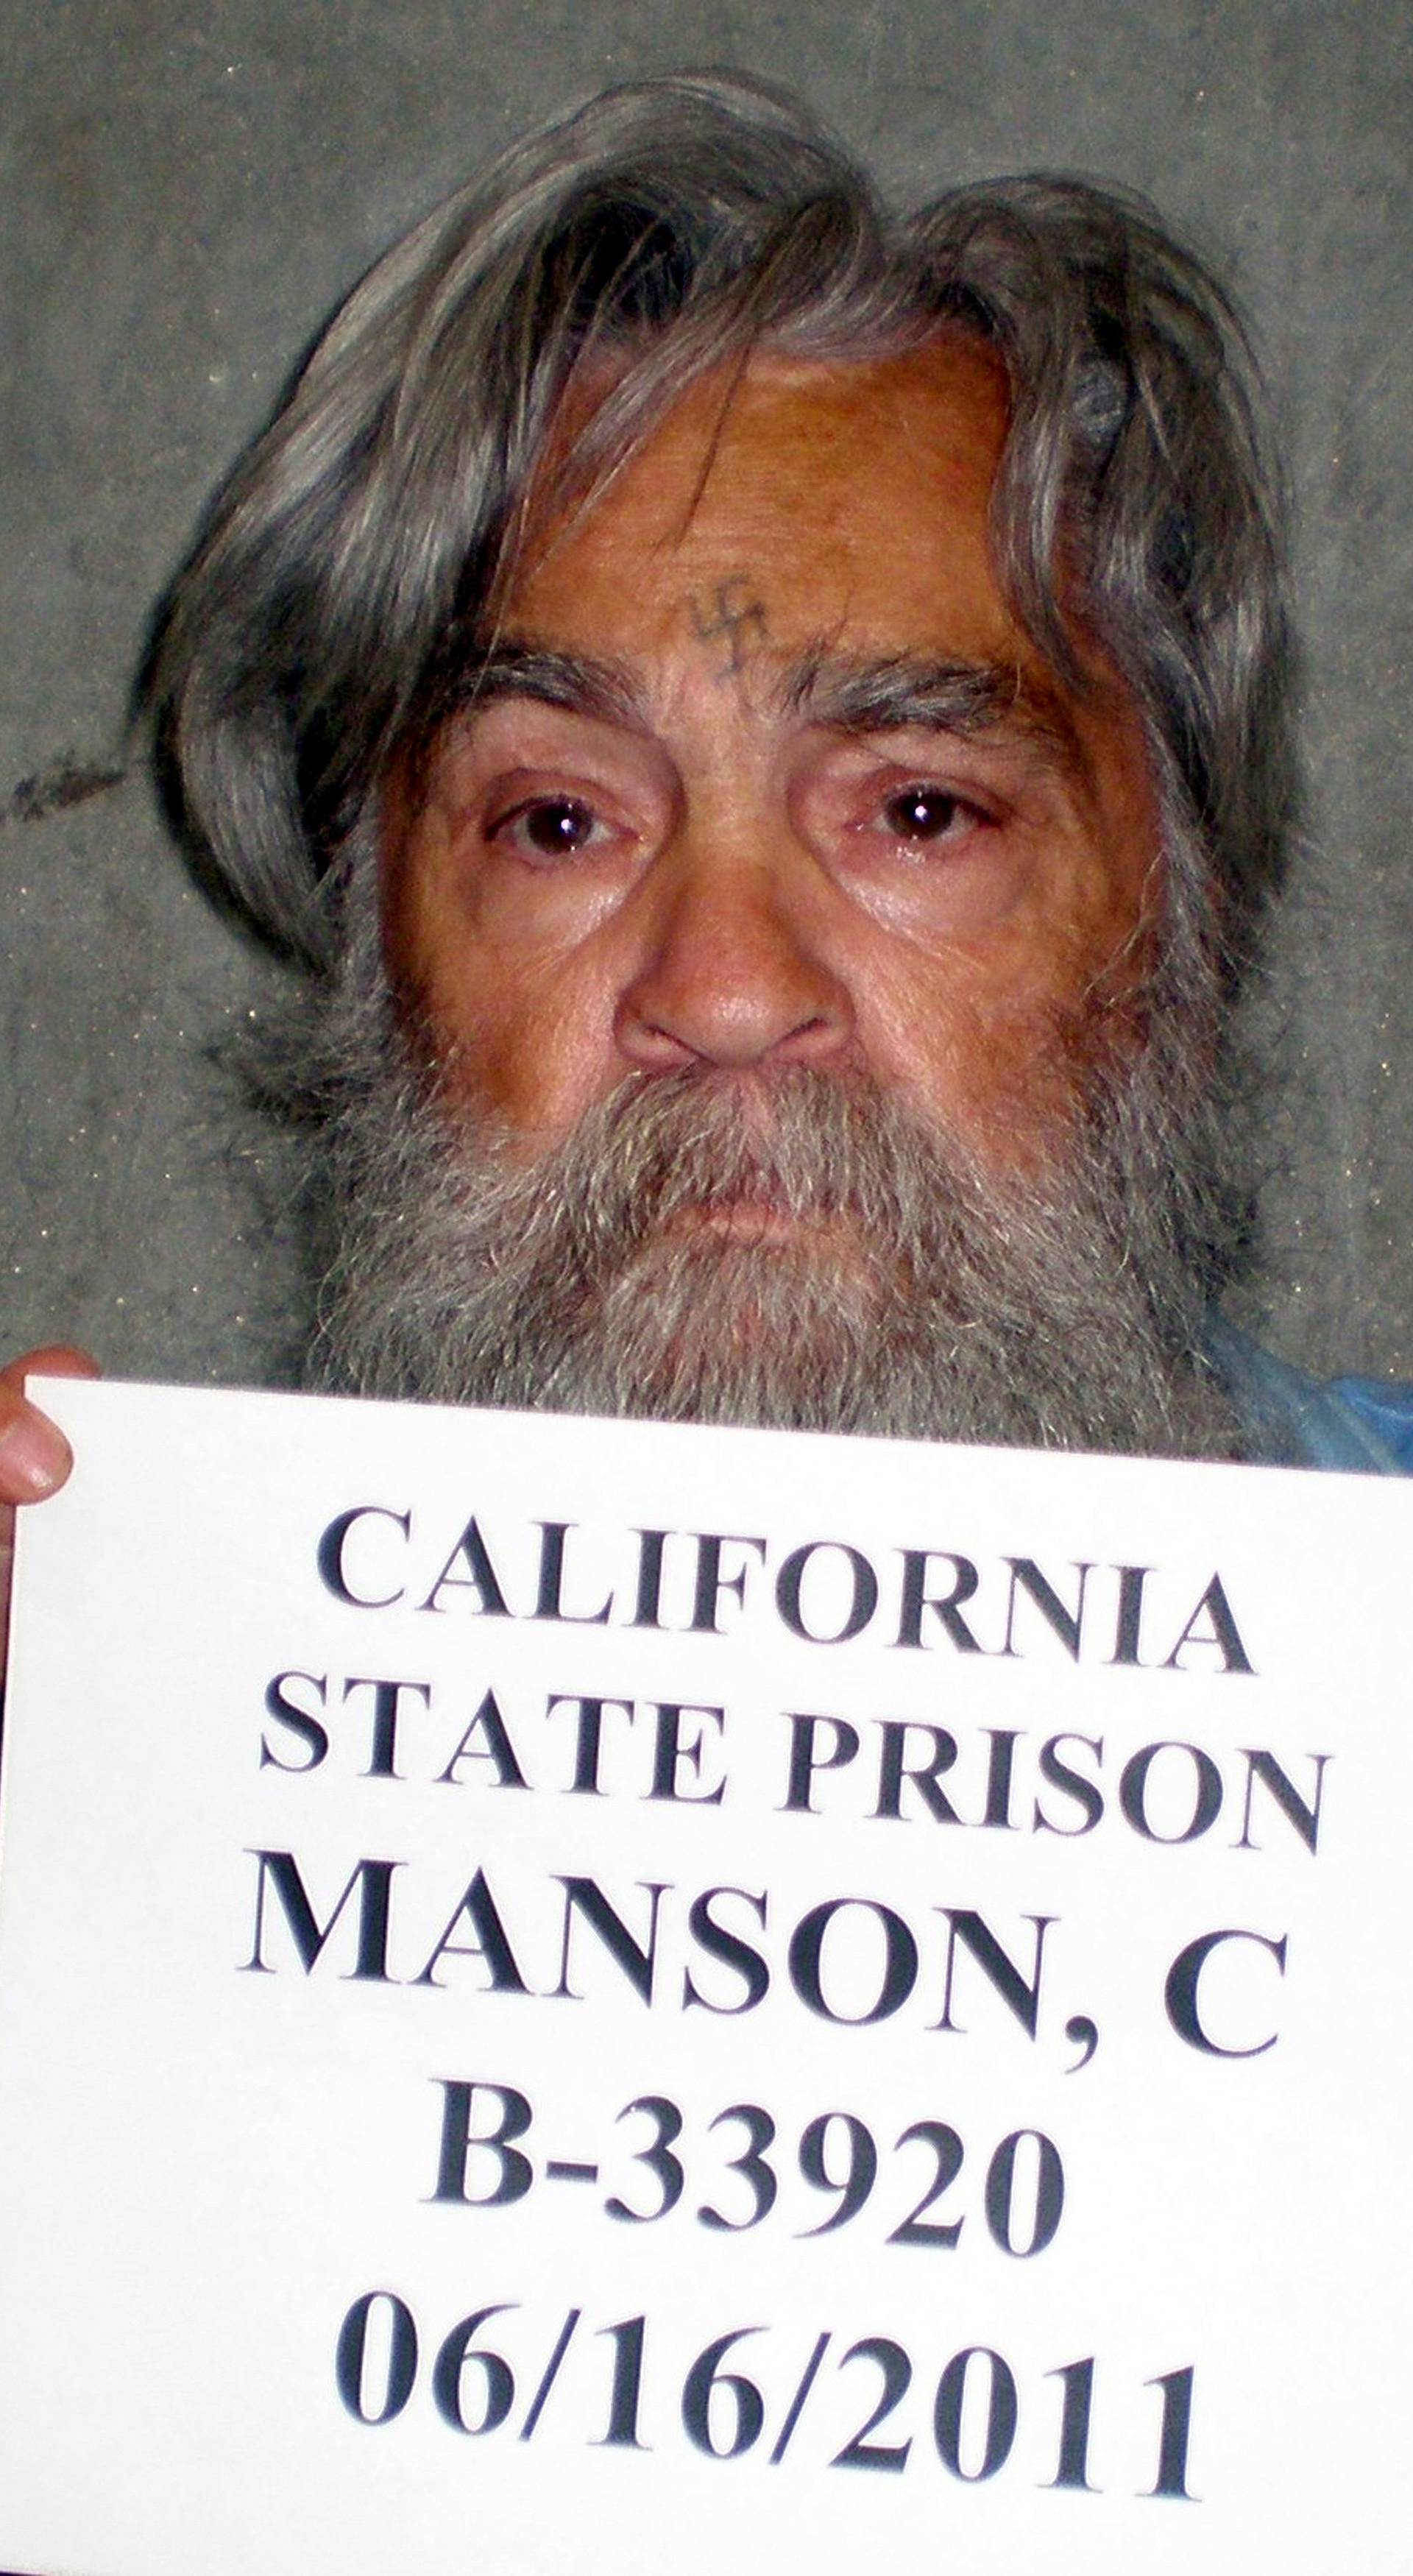 FILE PHOTO -  Handout photo of convicted murderer Charles Manson